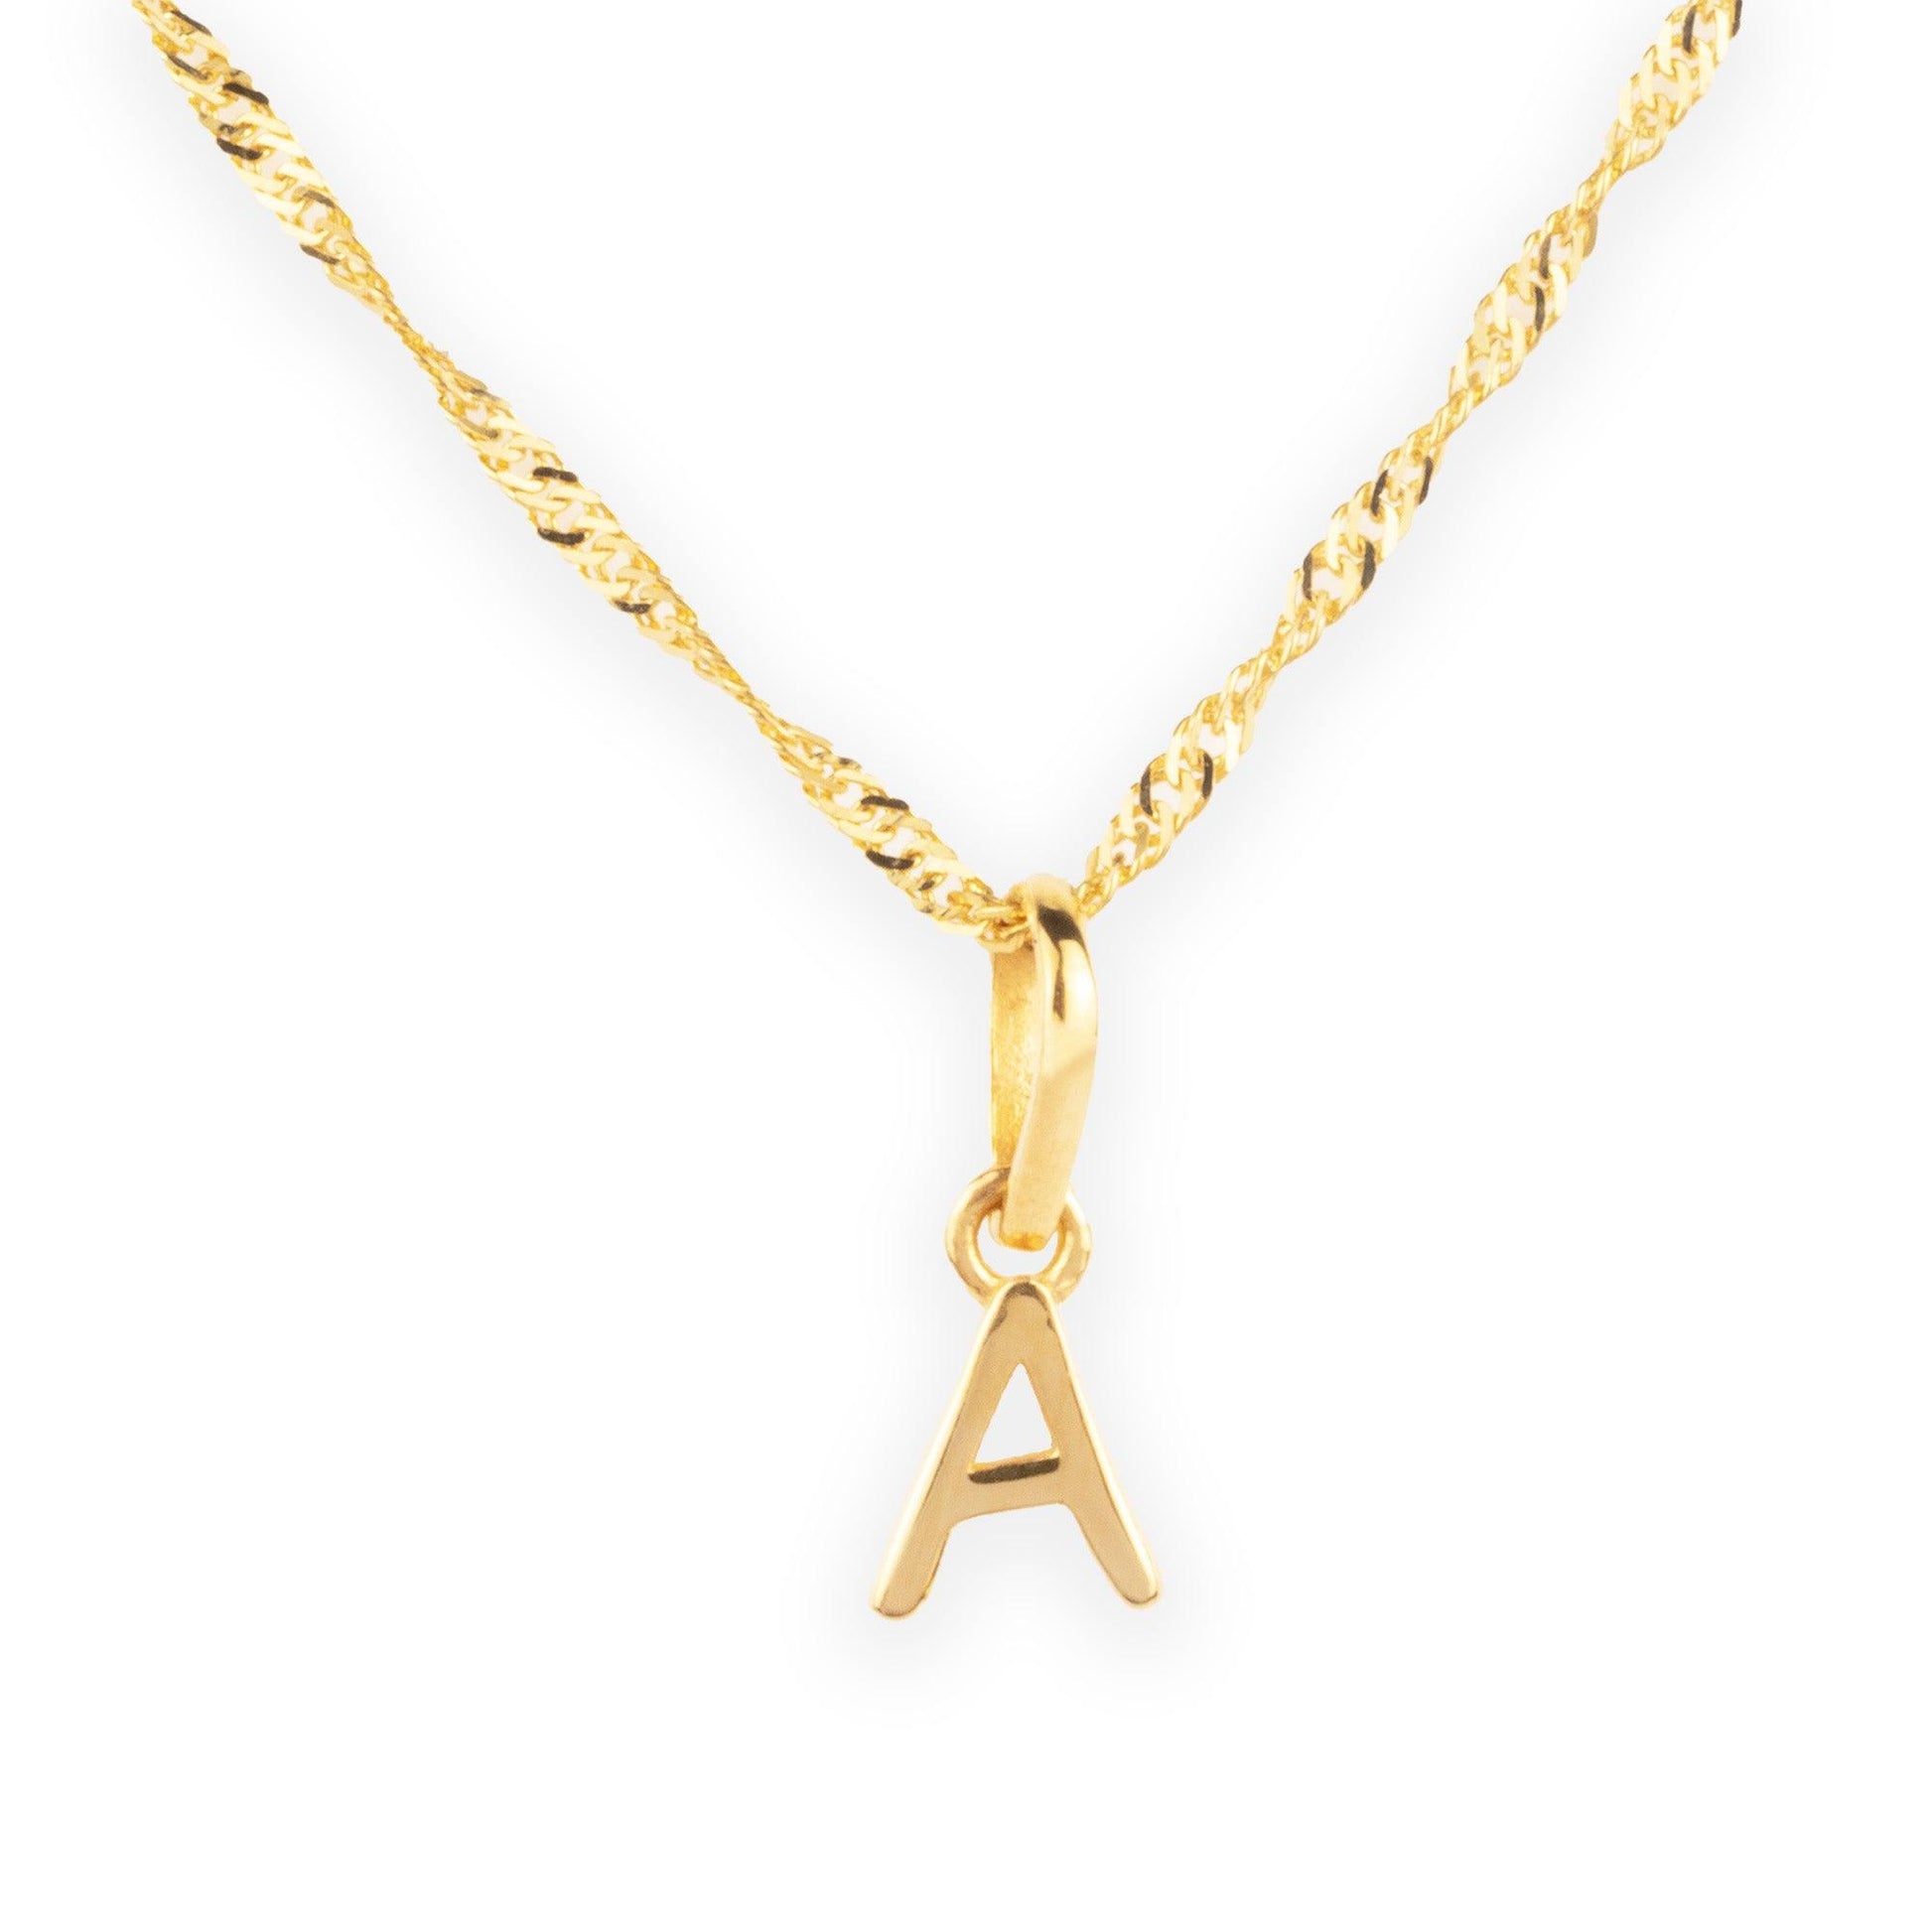 'A' 22ct Gold Initial Pendant P-7032-A - Minar Jewellers